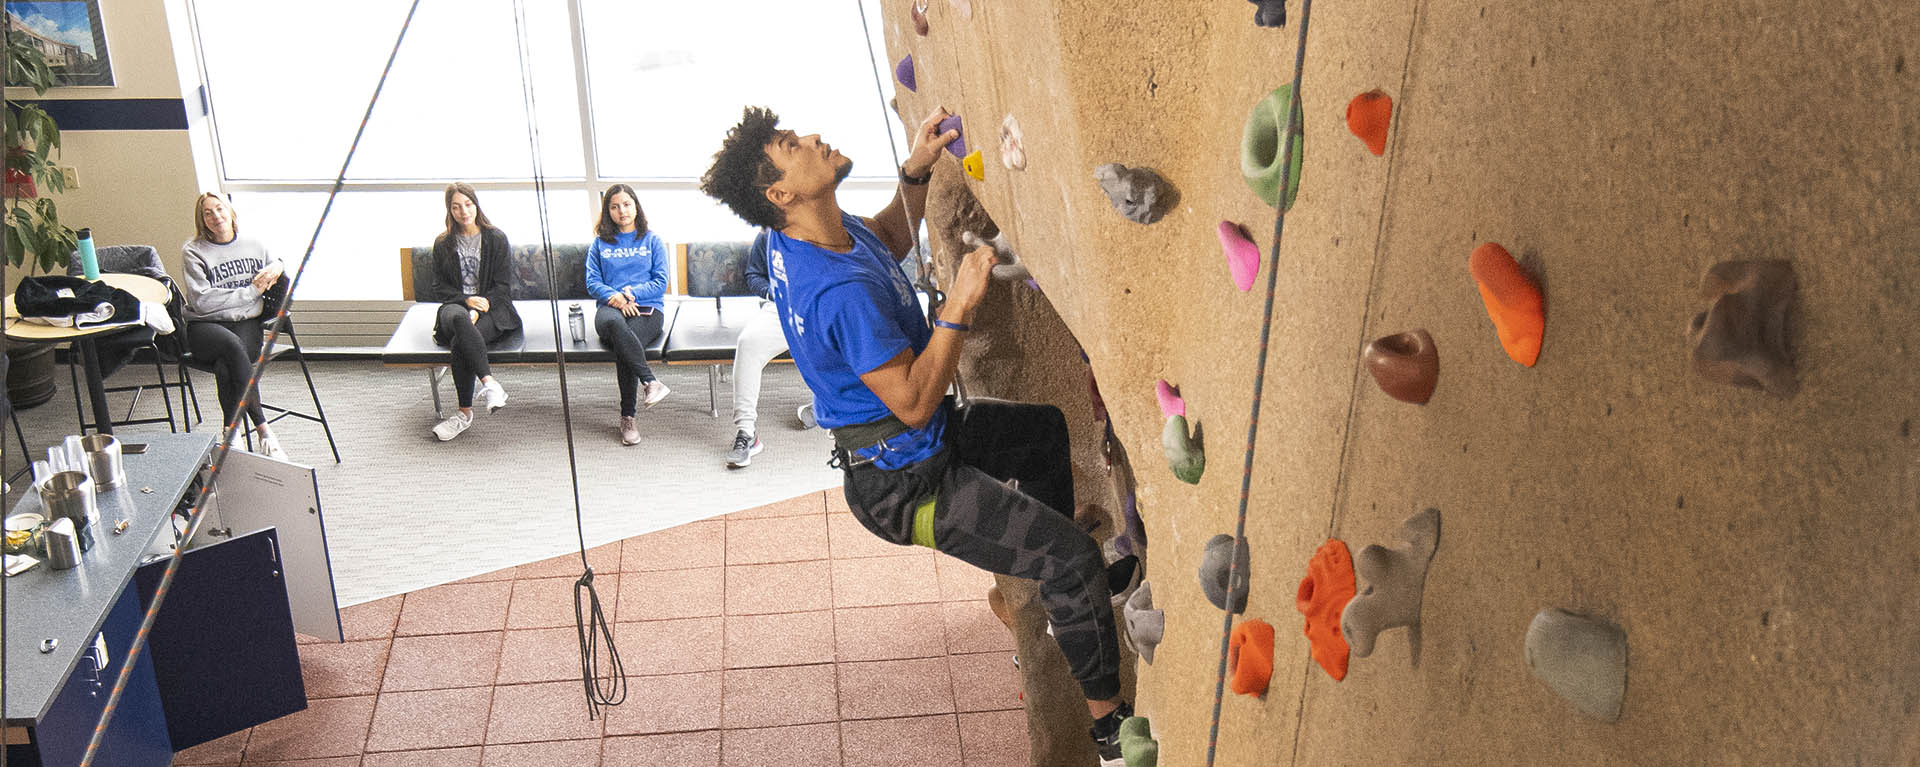 A student climbing the rock wall while others watch from below.